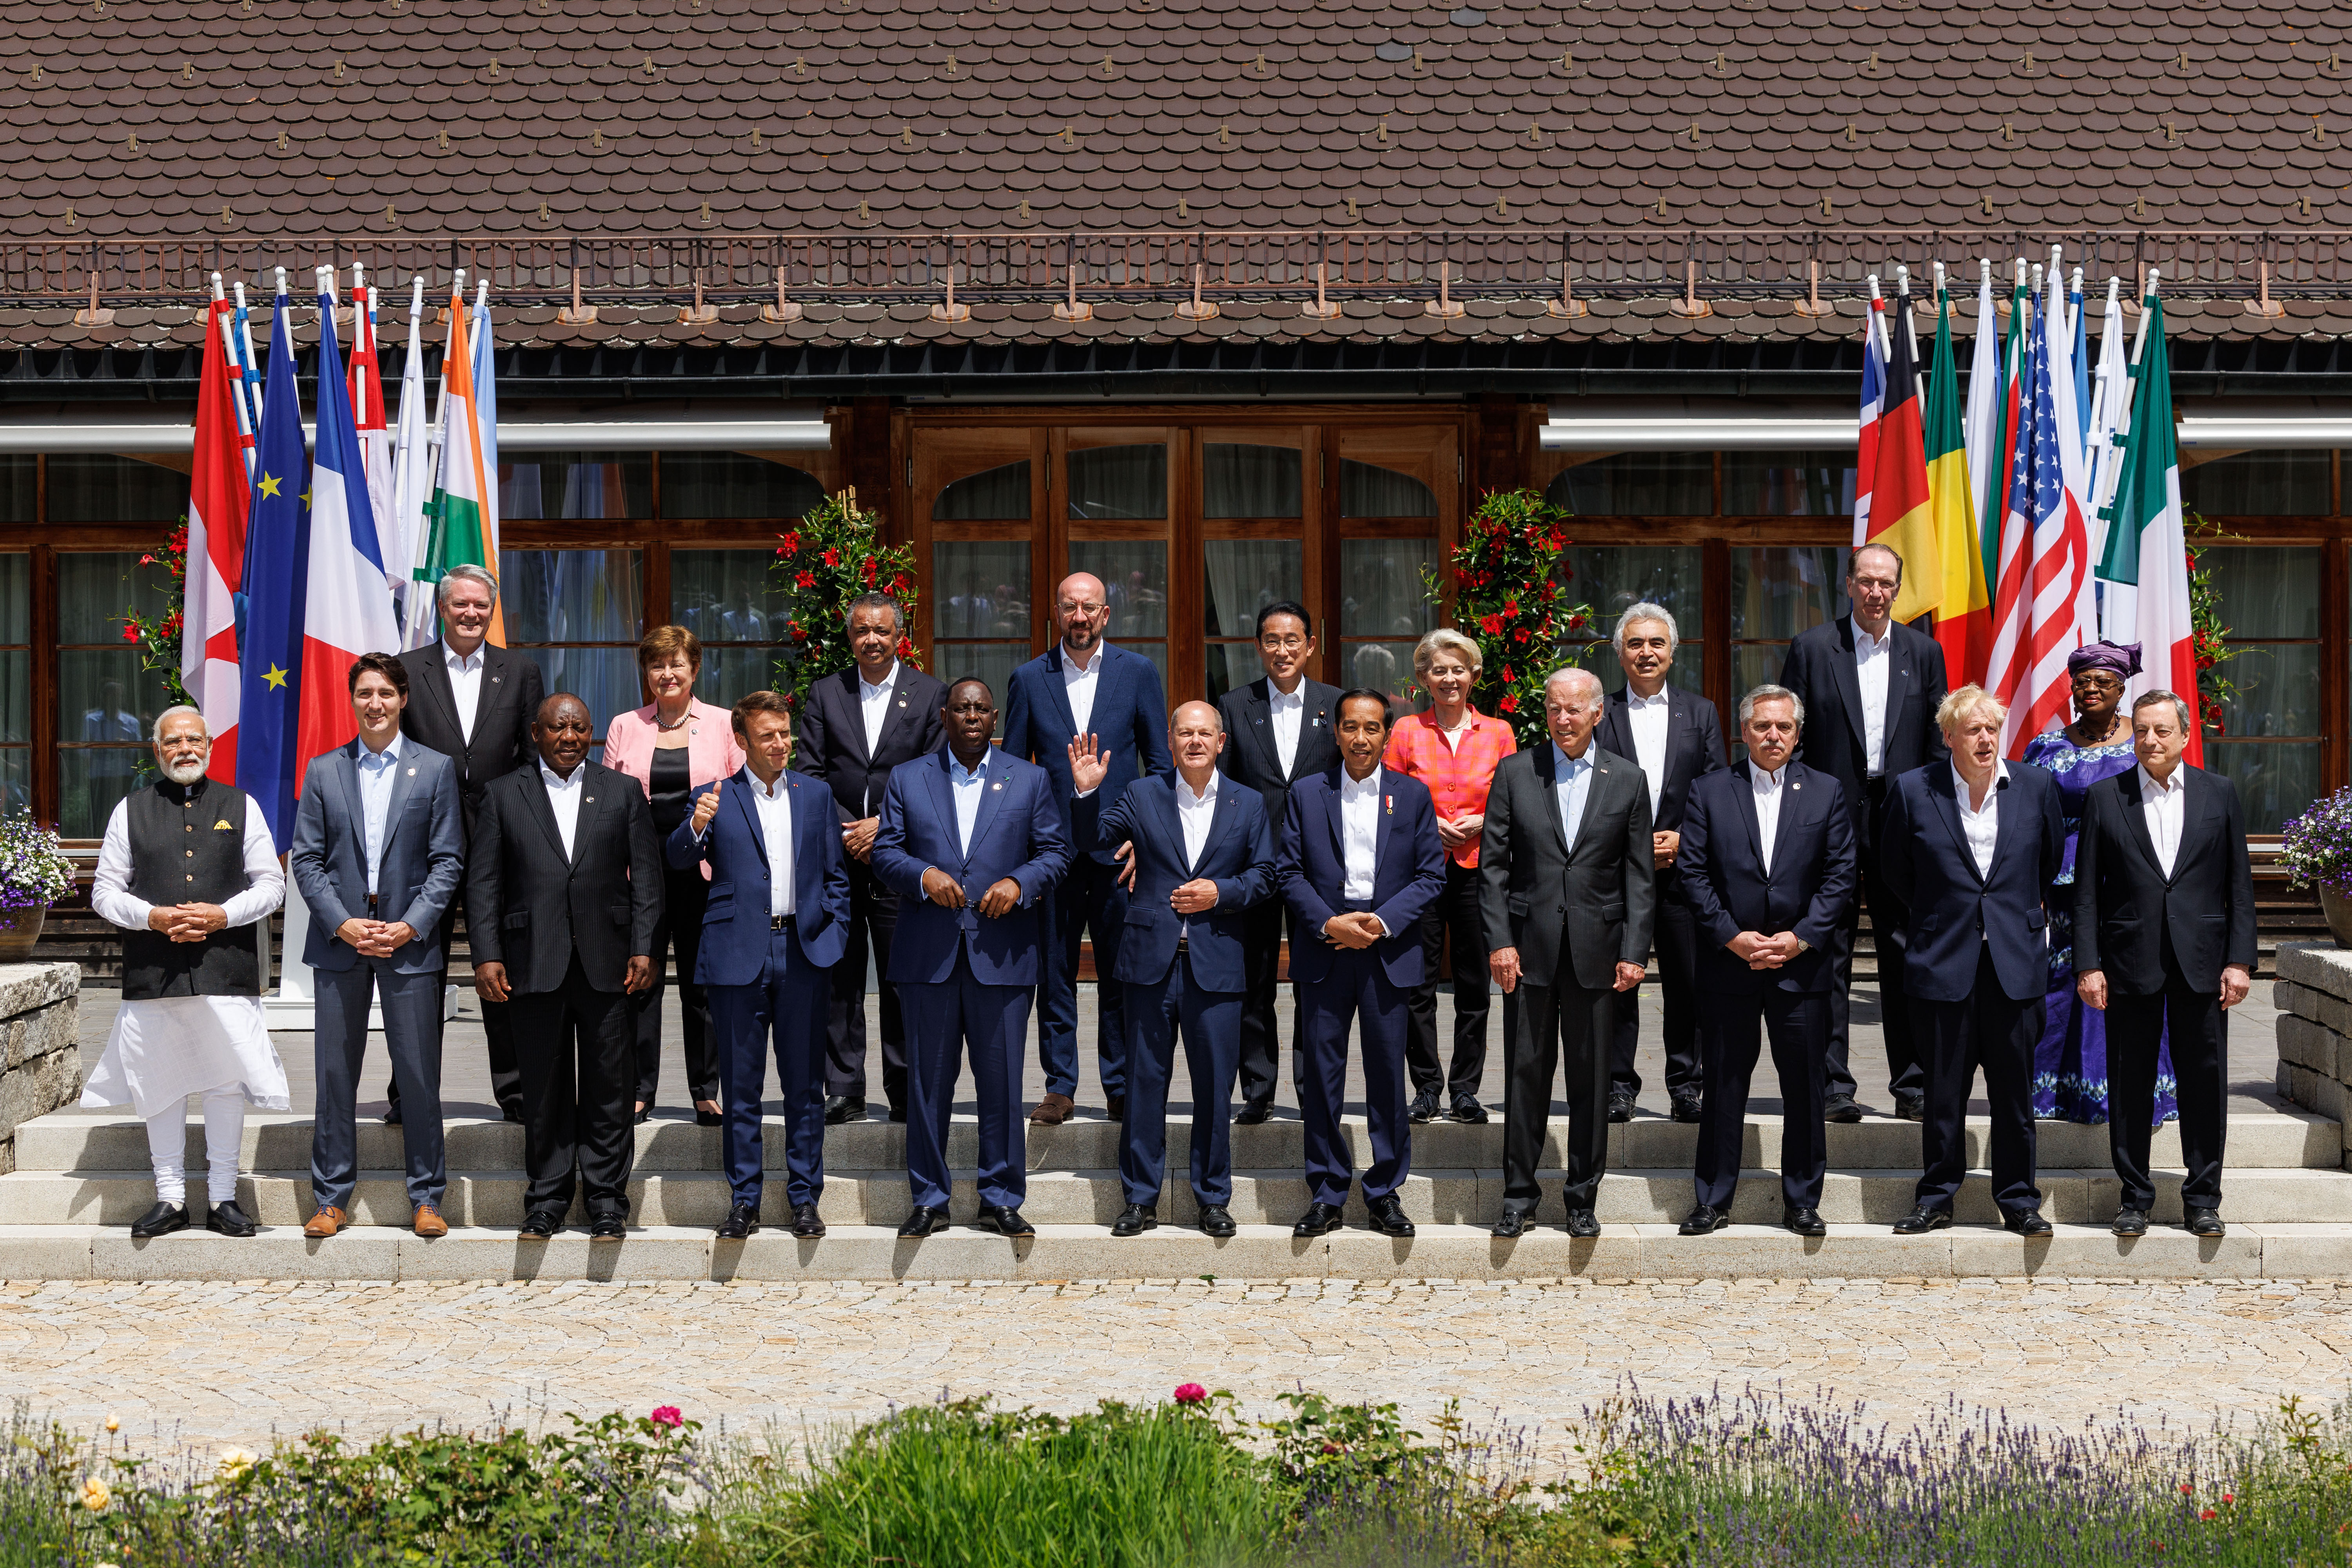 Group photo of the G7 heads of state and government with representatives of partner countries and international organisations.